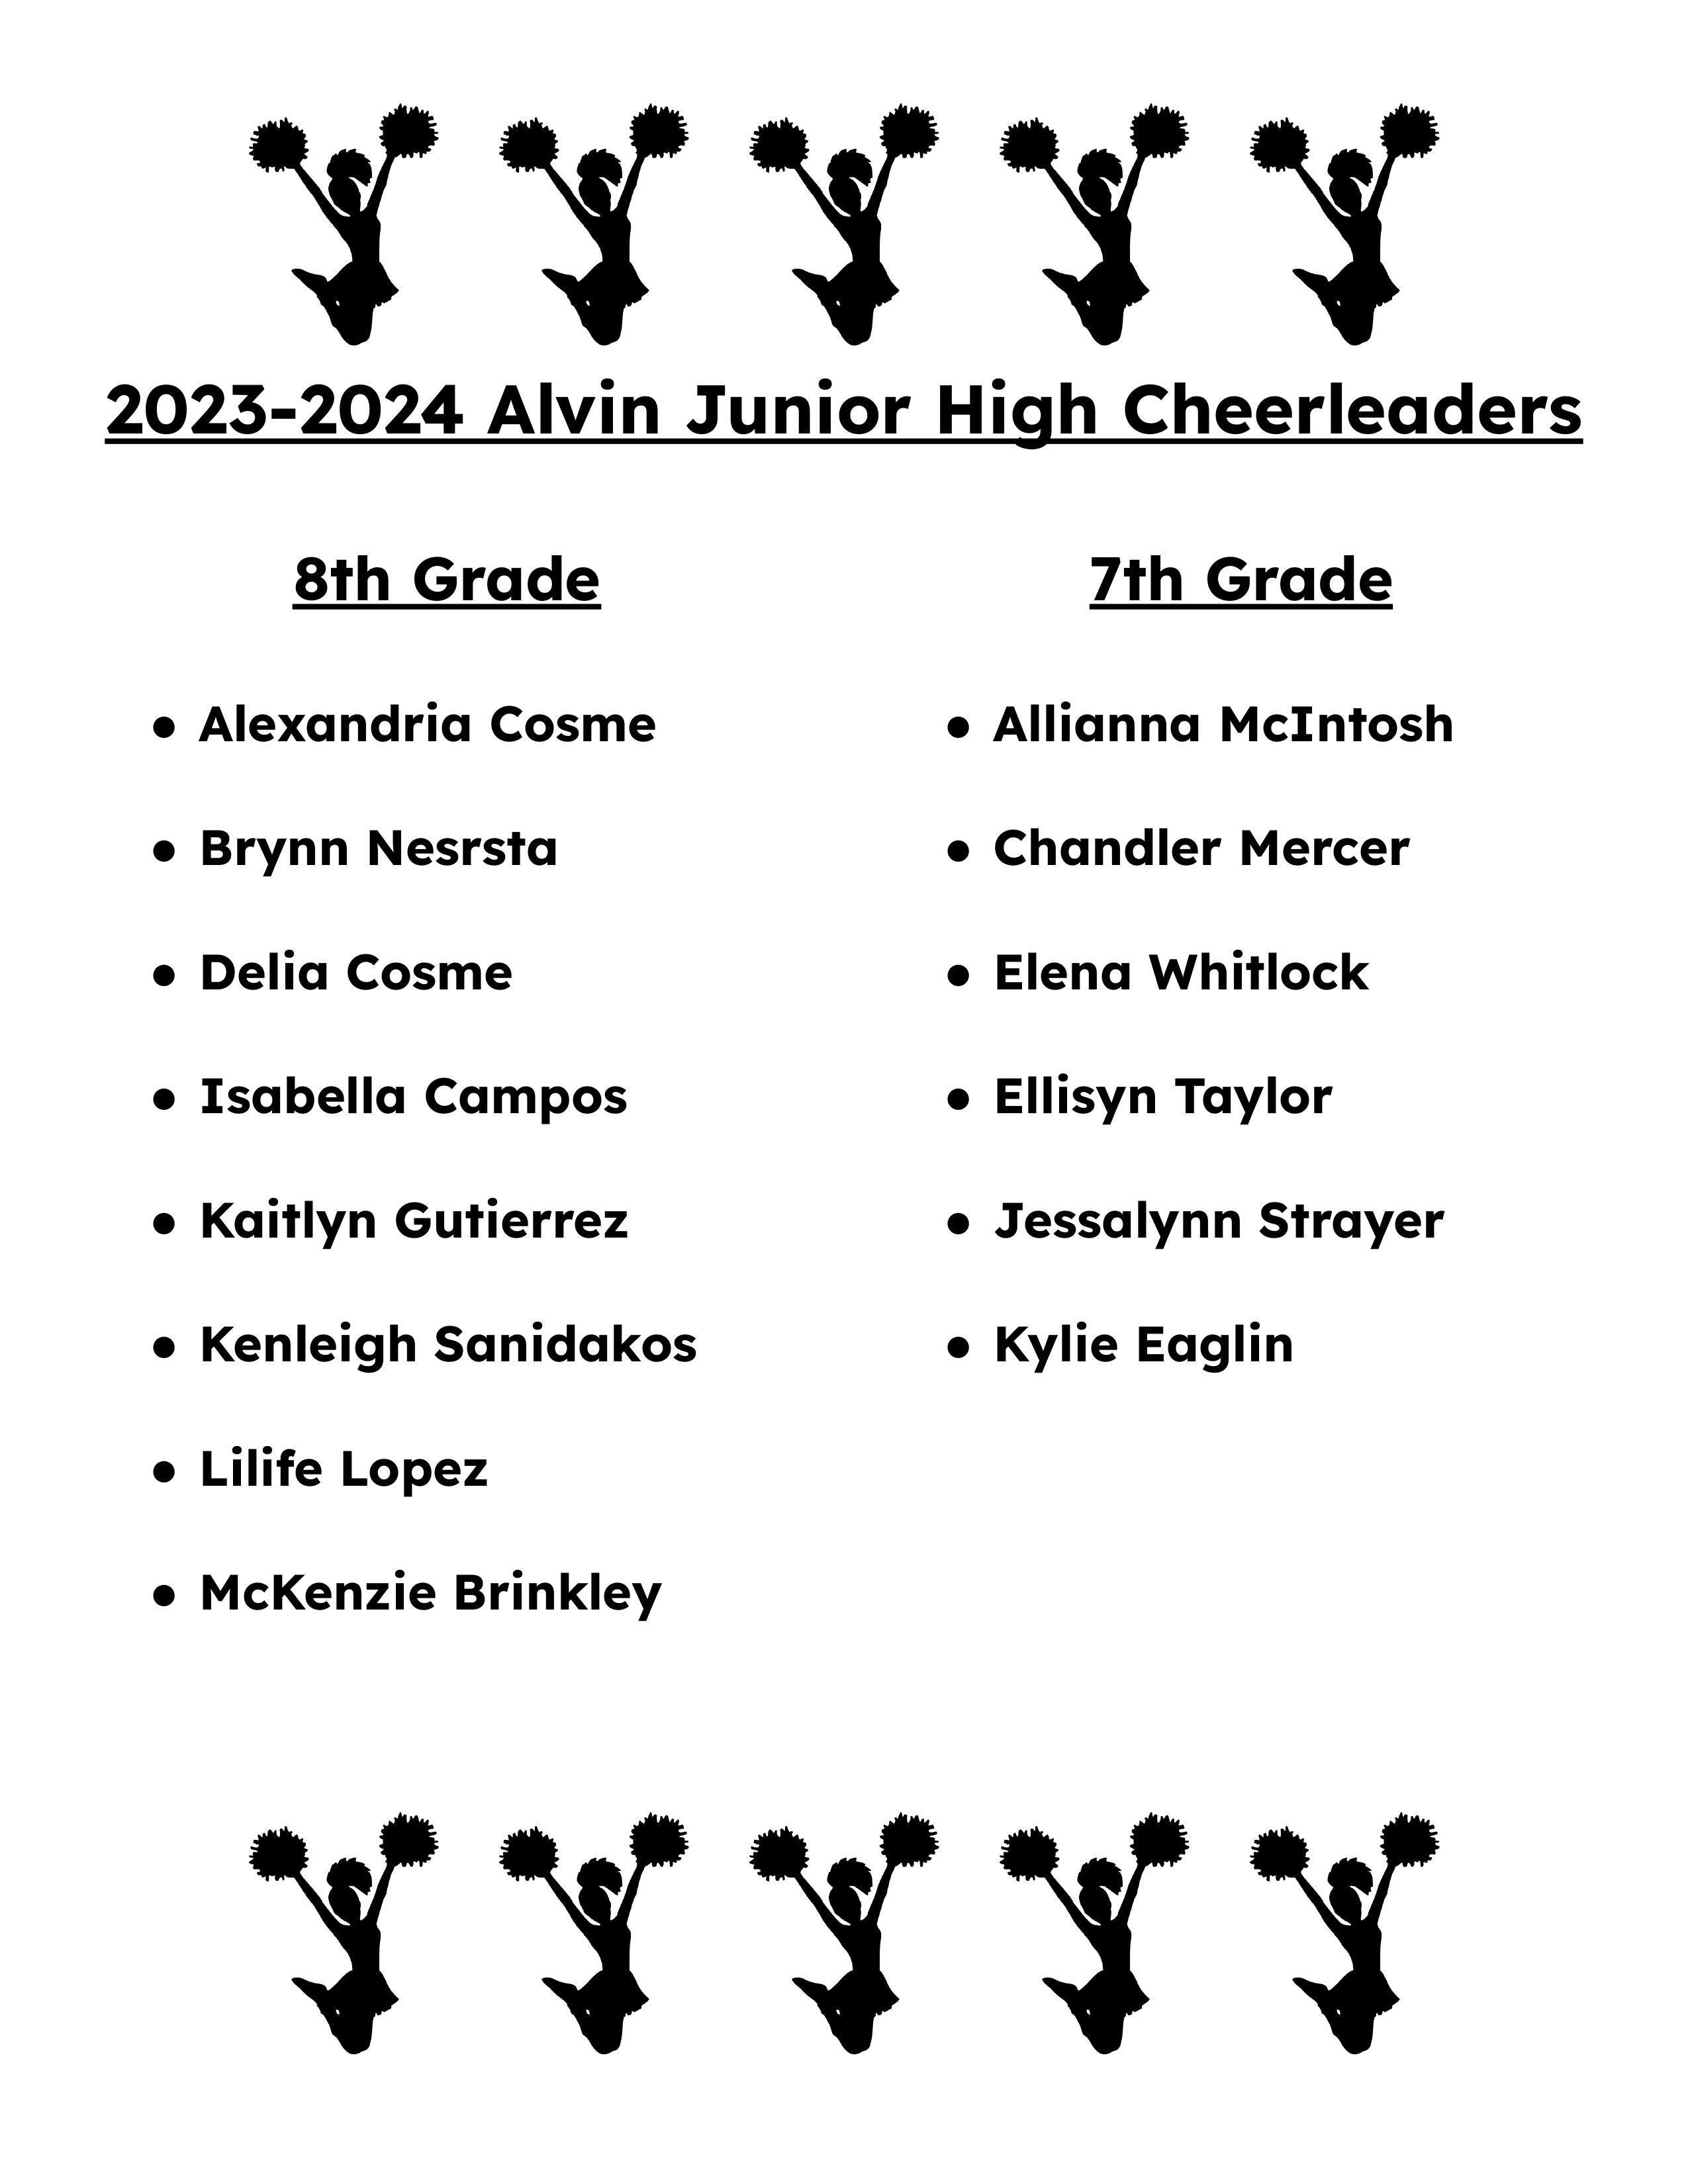 23-24 AJH Cheer Roster